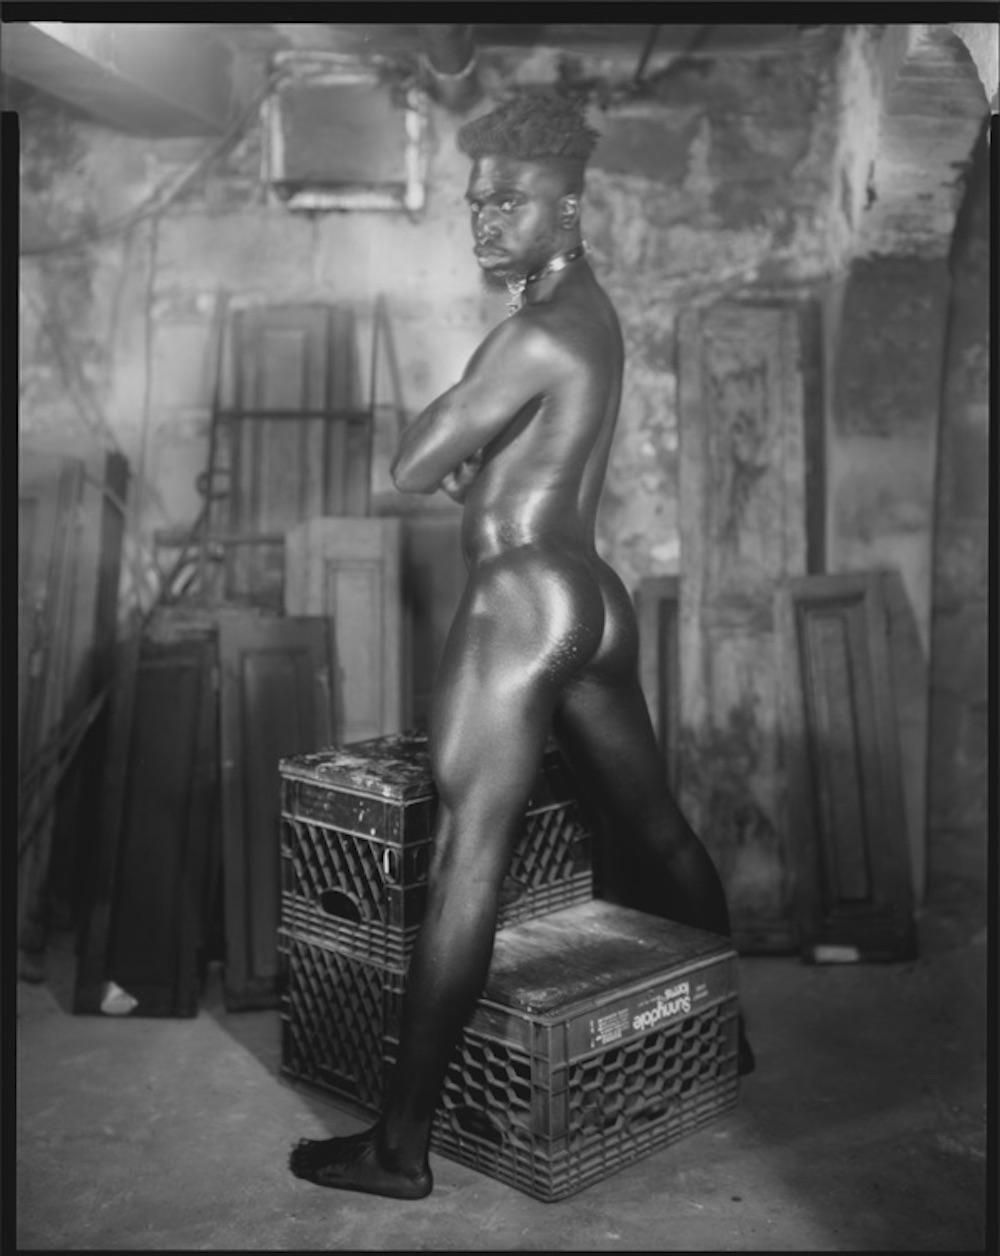 A nude, Black model oiled, and posing from behind.